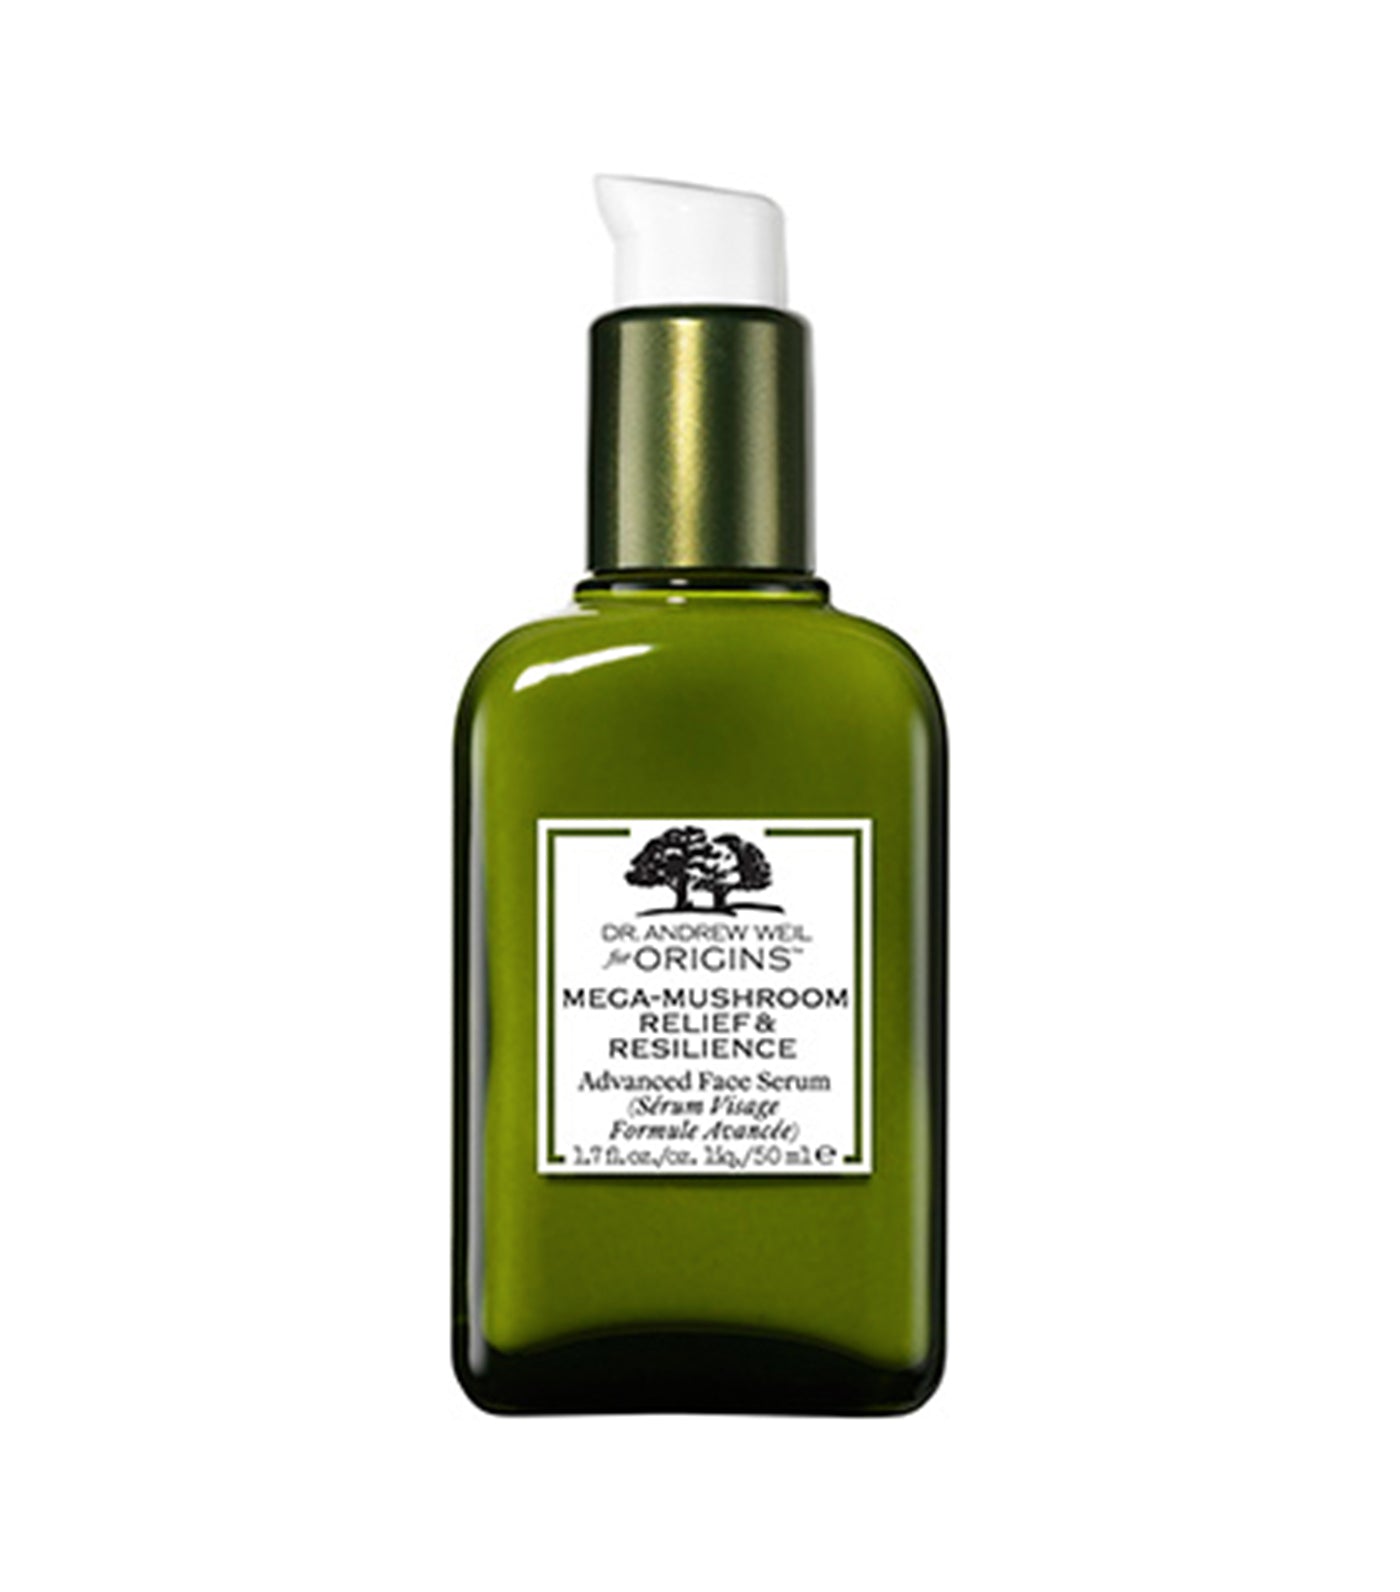 DR. ANDREW WEIL FOR ORIGINS™ Mega-Mushroom Relief & Resilience Advanced Face Serum